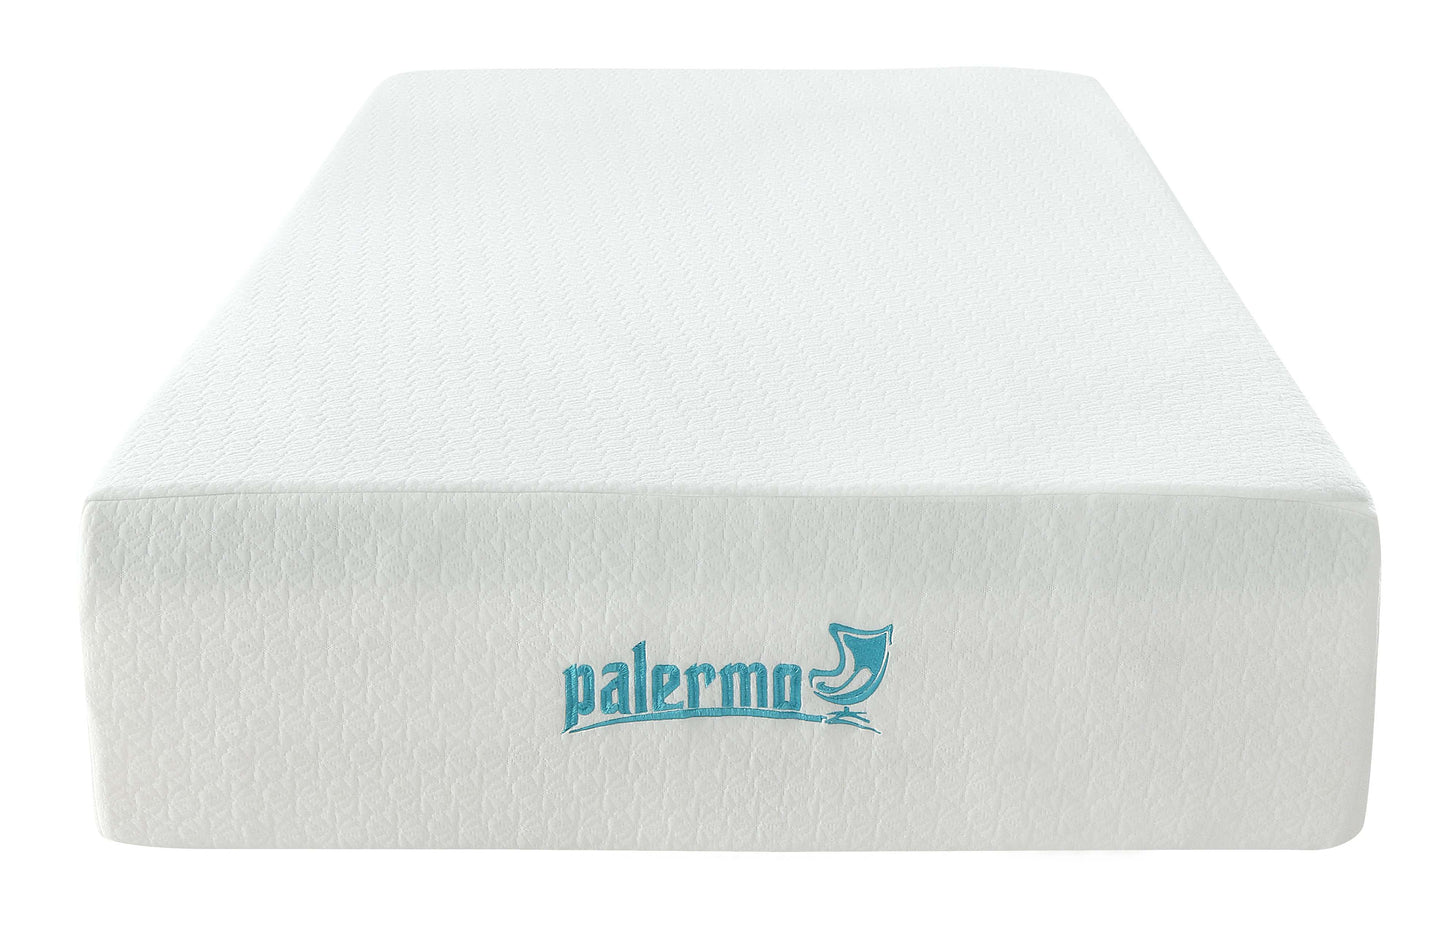 Palermo King Single Mattress 30cm Memory Foam Green Tea Infused CertiPUR Approved - image2